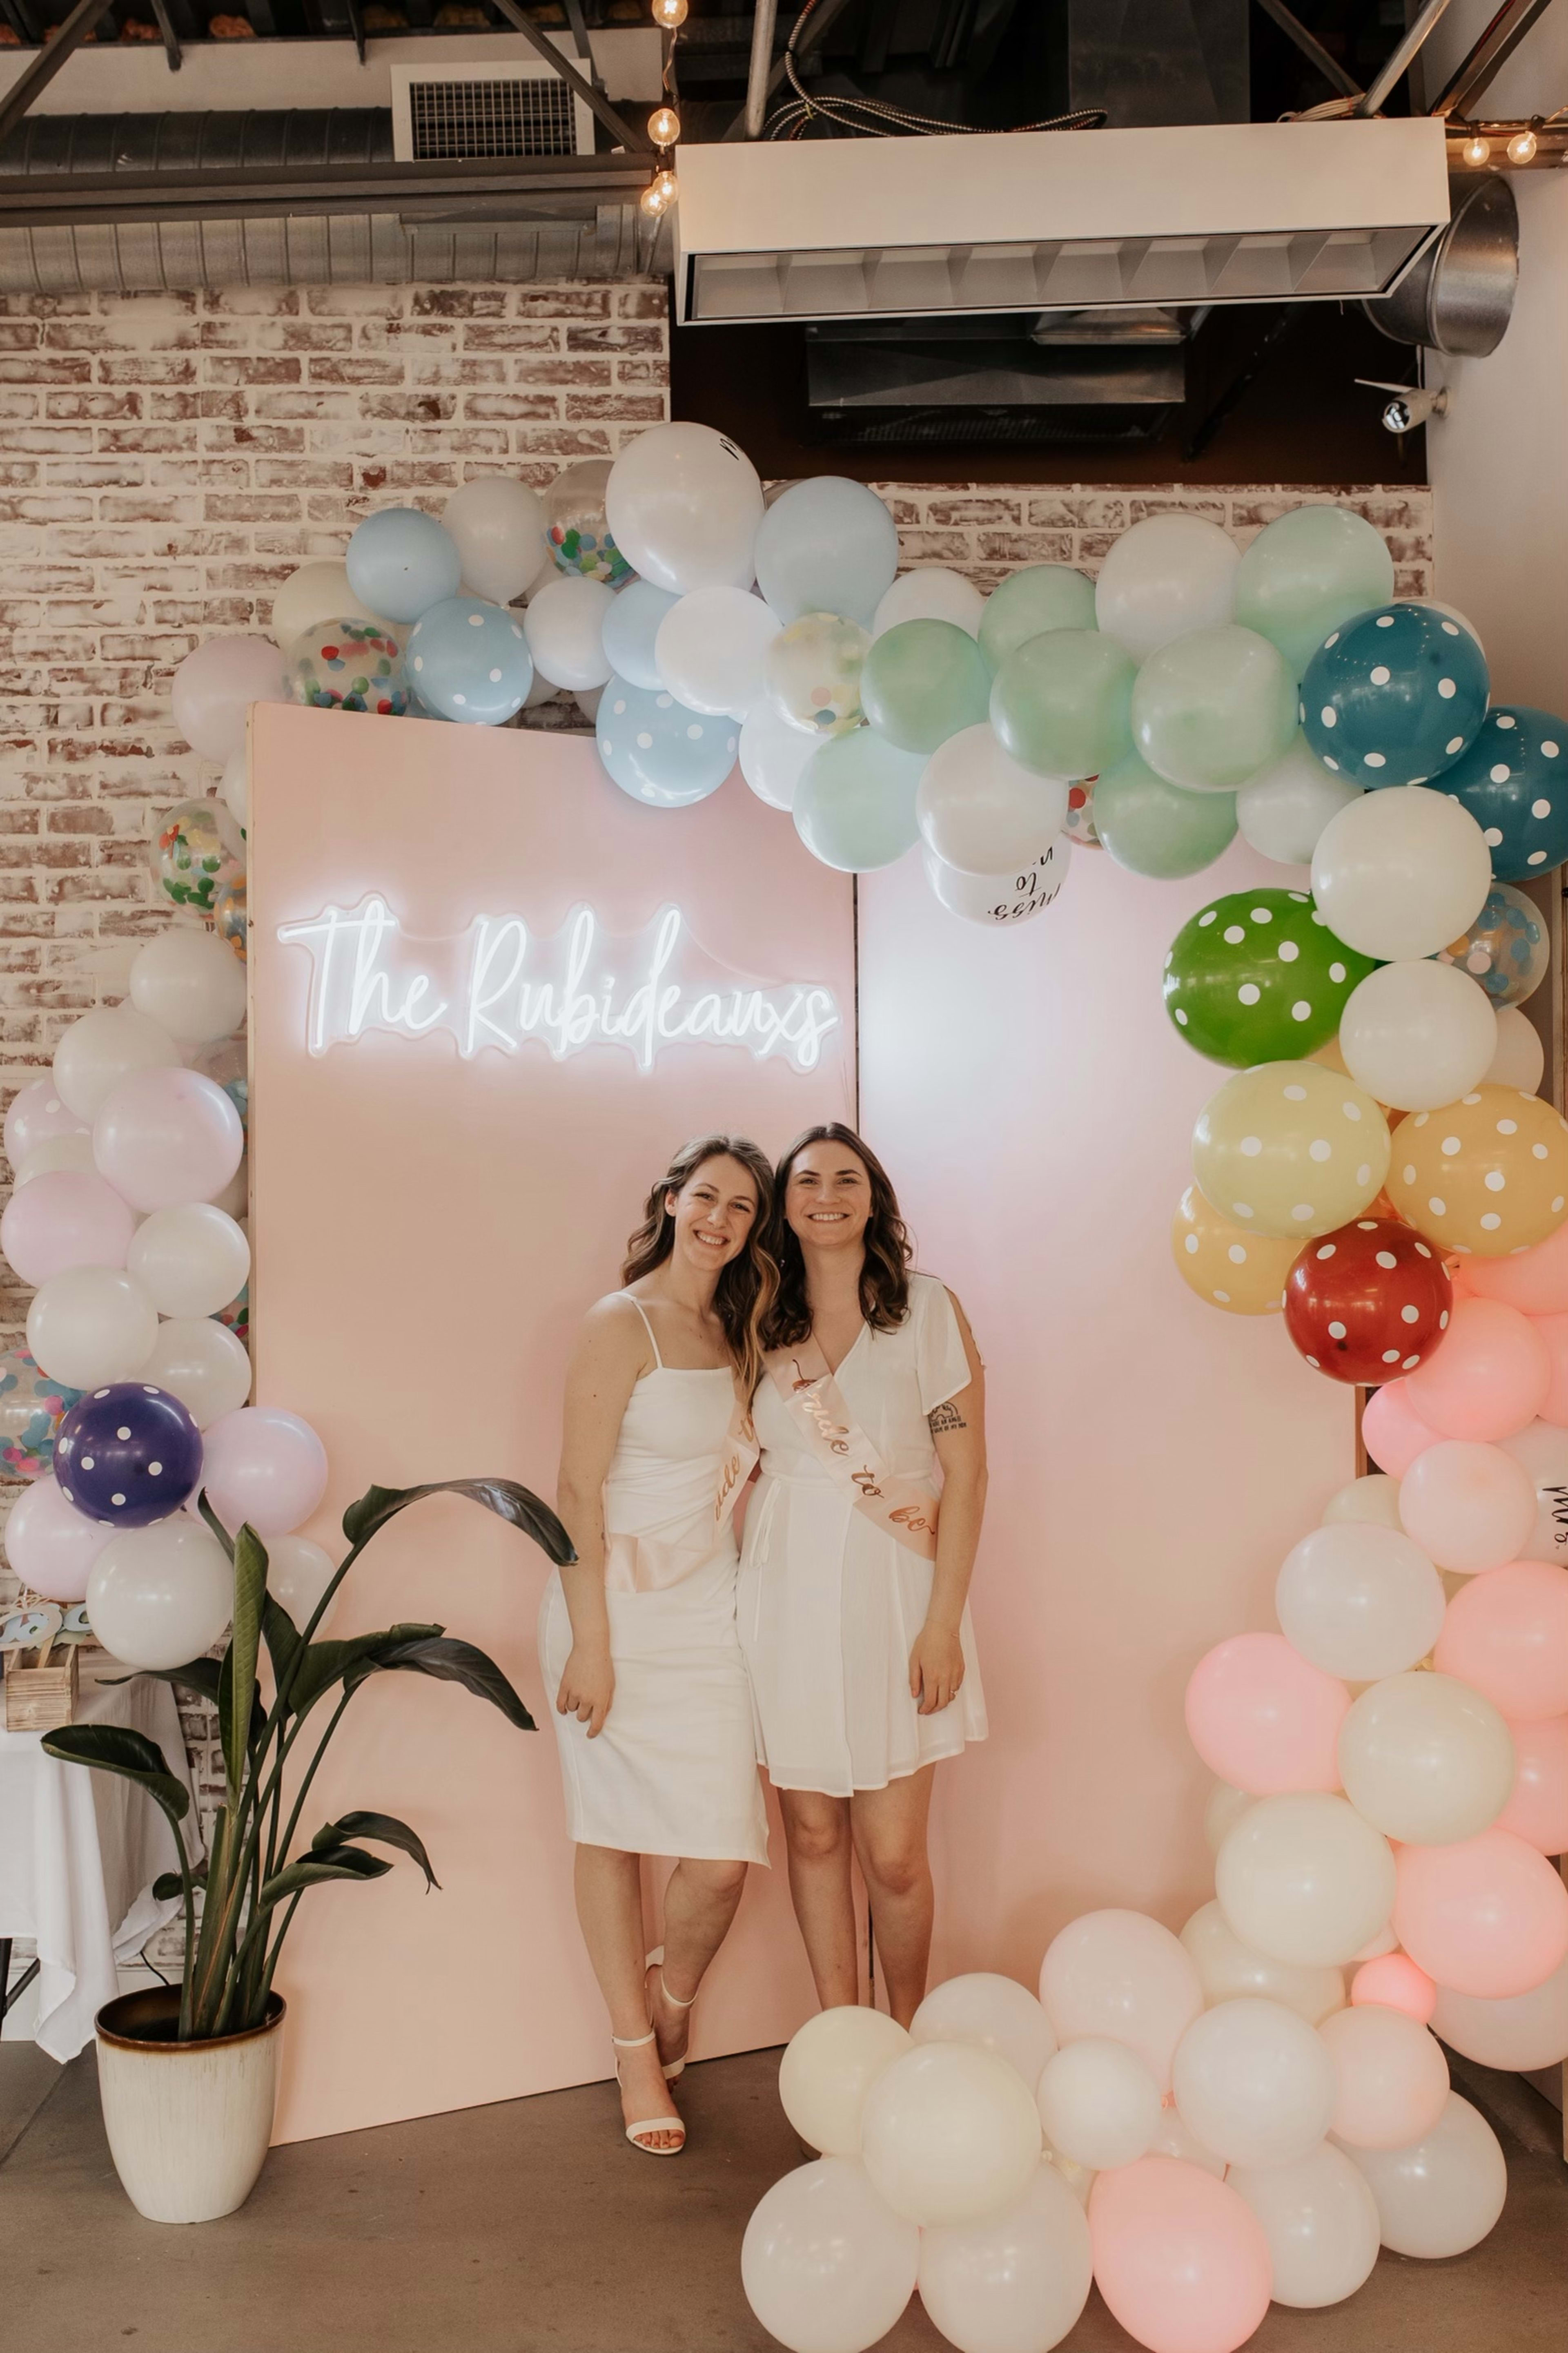 A couple of women standing next to each other in front of rainbow balloons.